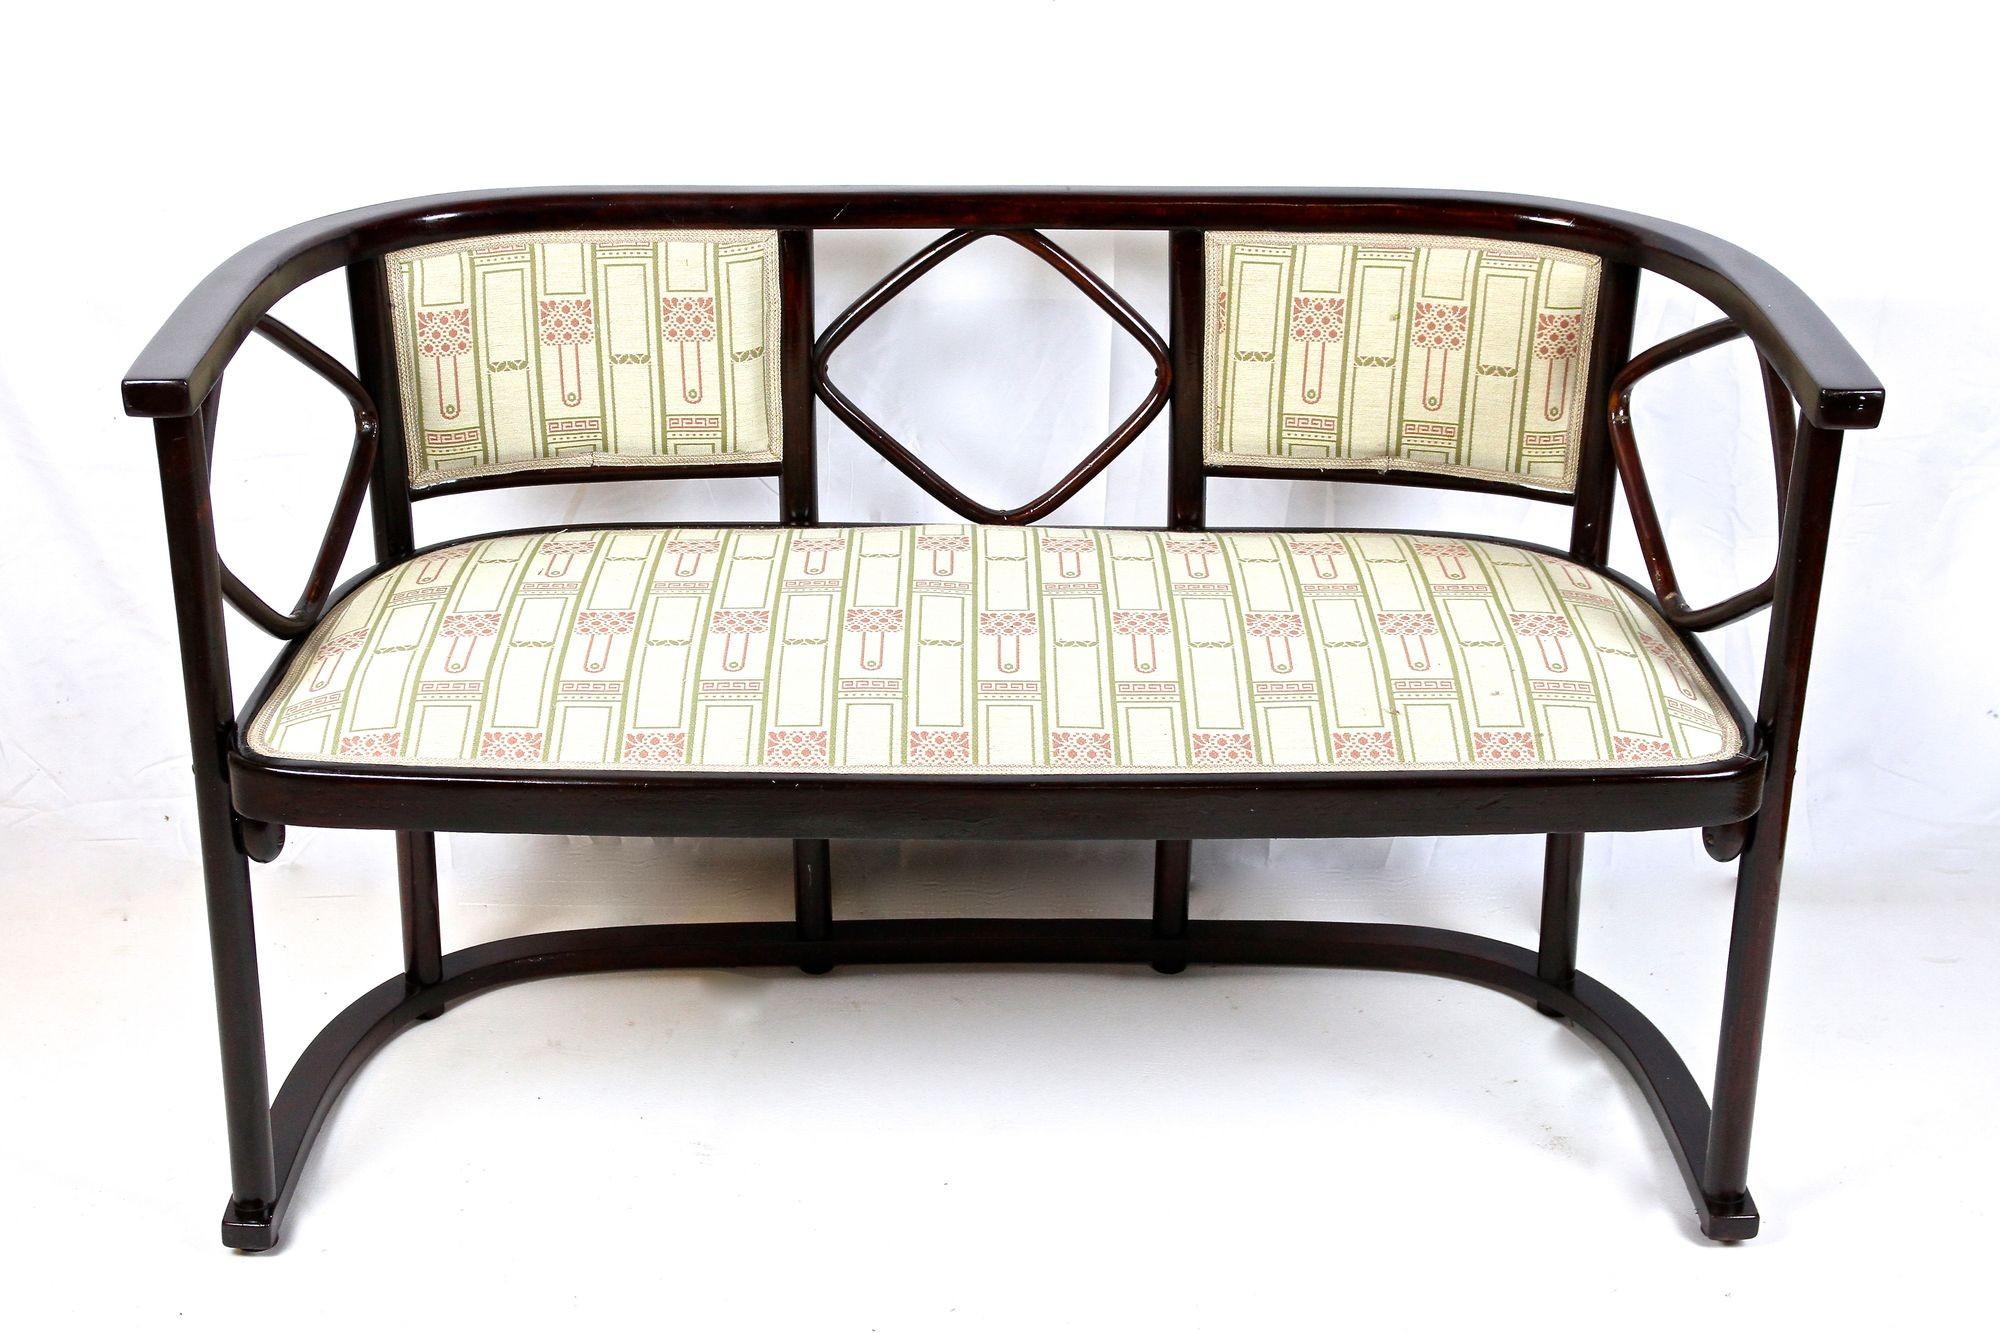 Absolutely gorgeous bentwood seating set by Thonet Austria, designed by none other than famous Austrian architect Josef Hoffmann, wellknown from the world renowed Wiener Werkstaette. Extraordinary shaped of fine bentwood (=beech was bent under steam